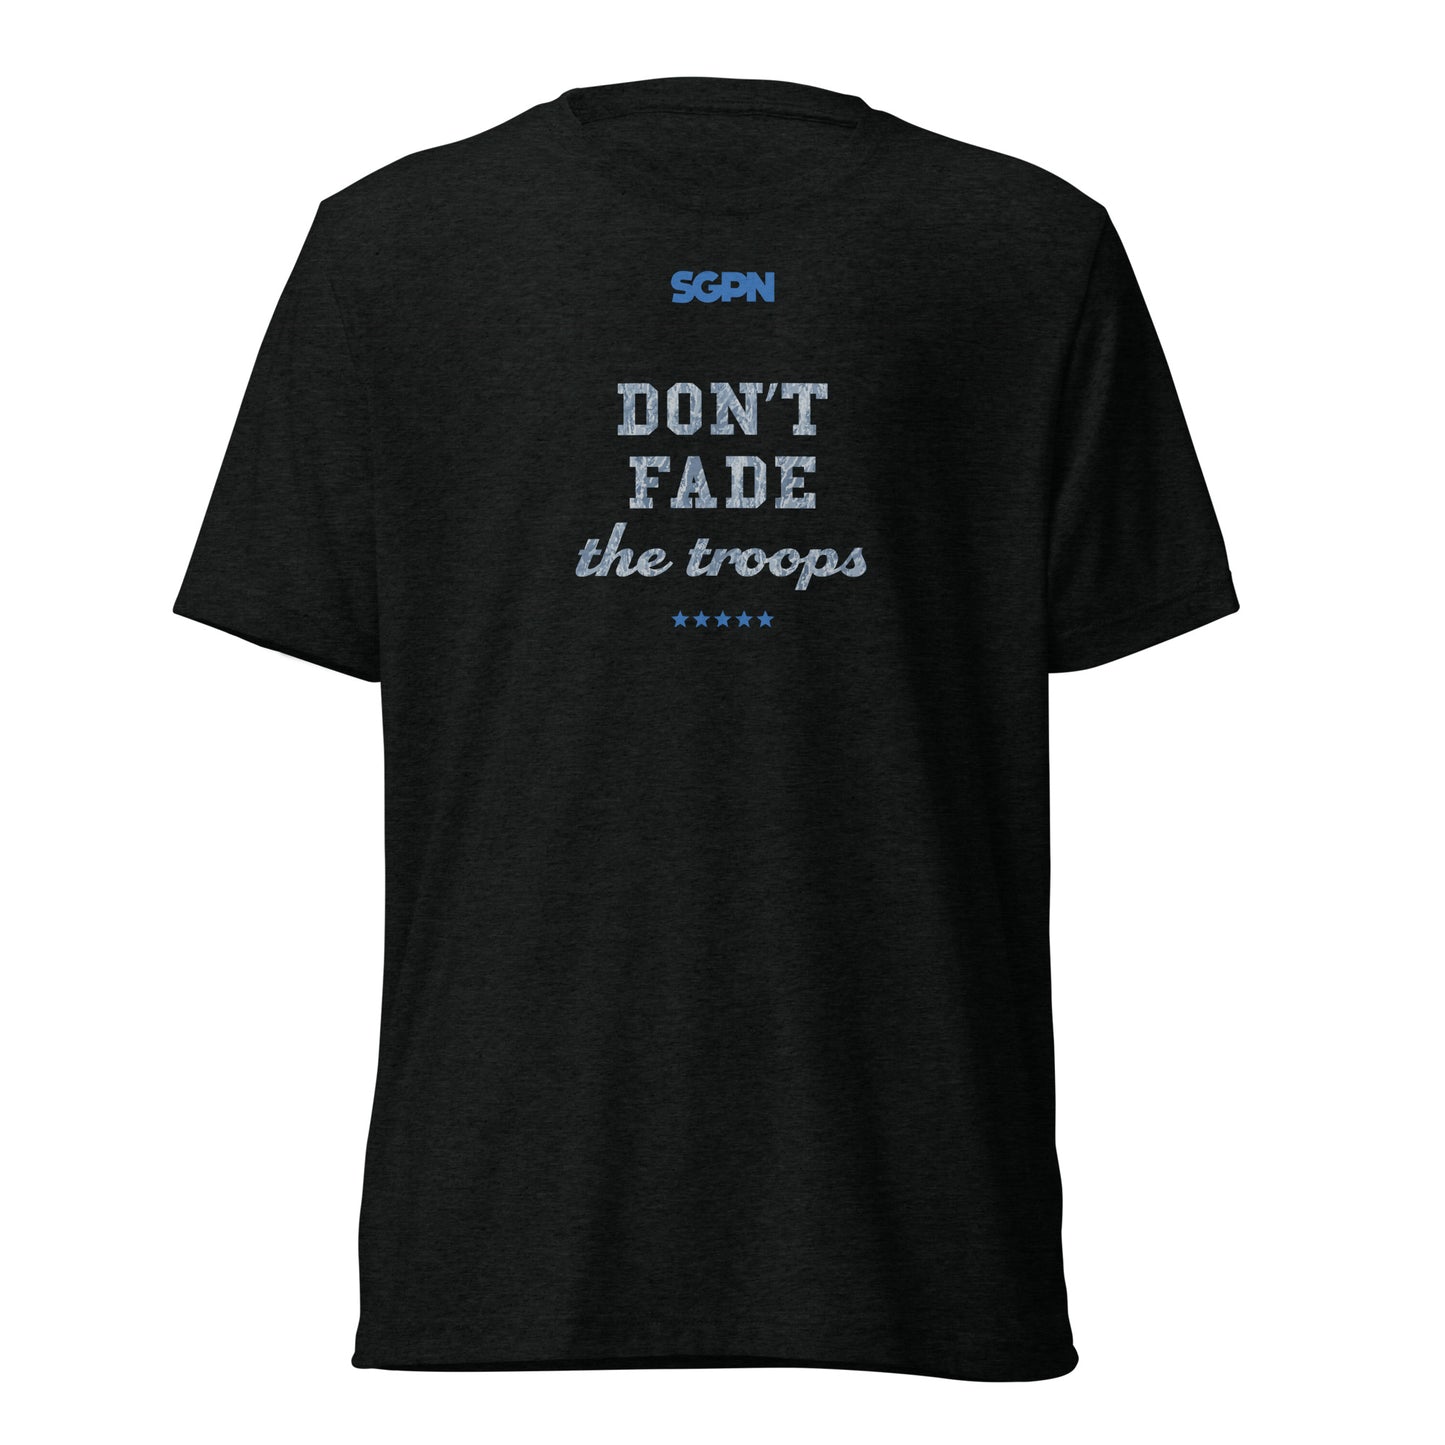 Don't Fade the Troops - Short sleeve t-shirt (v2)